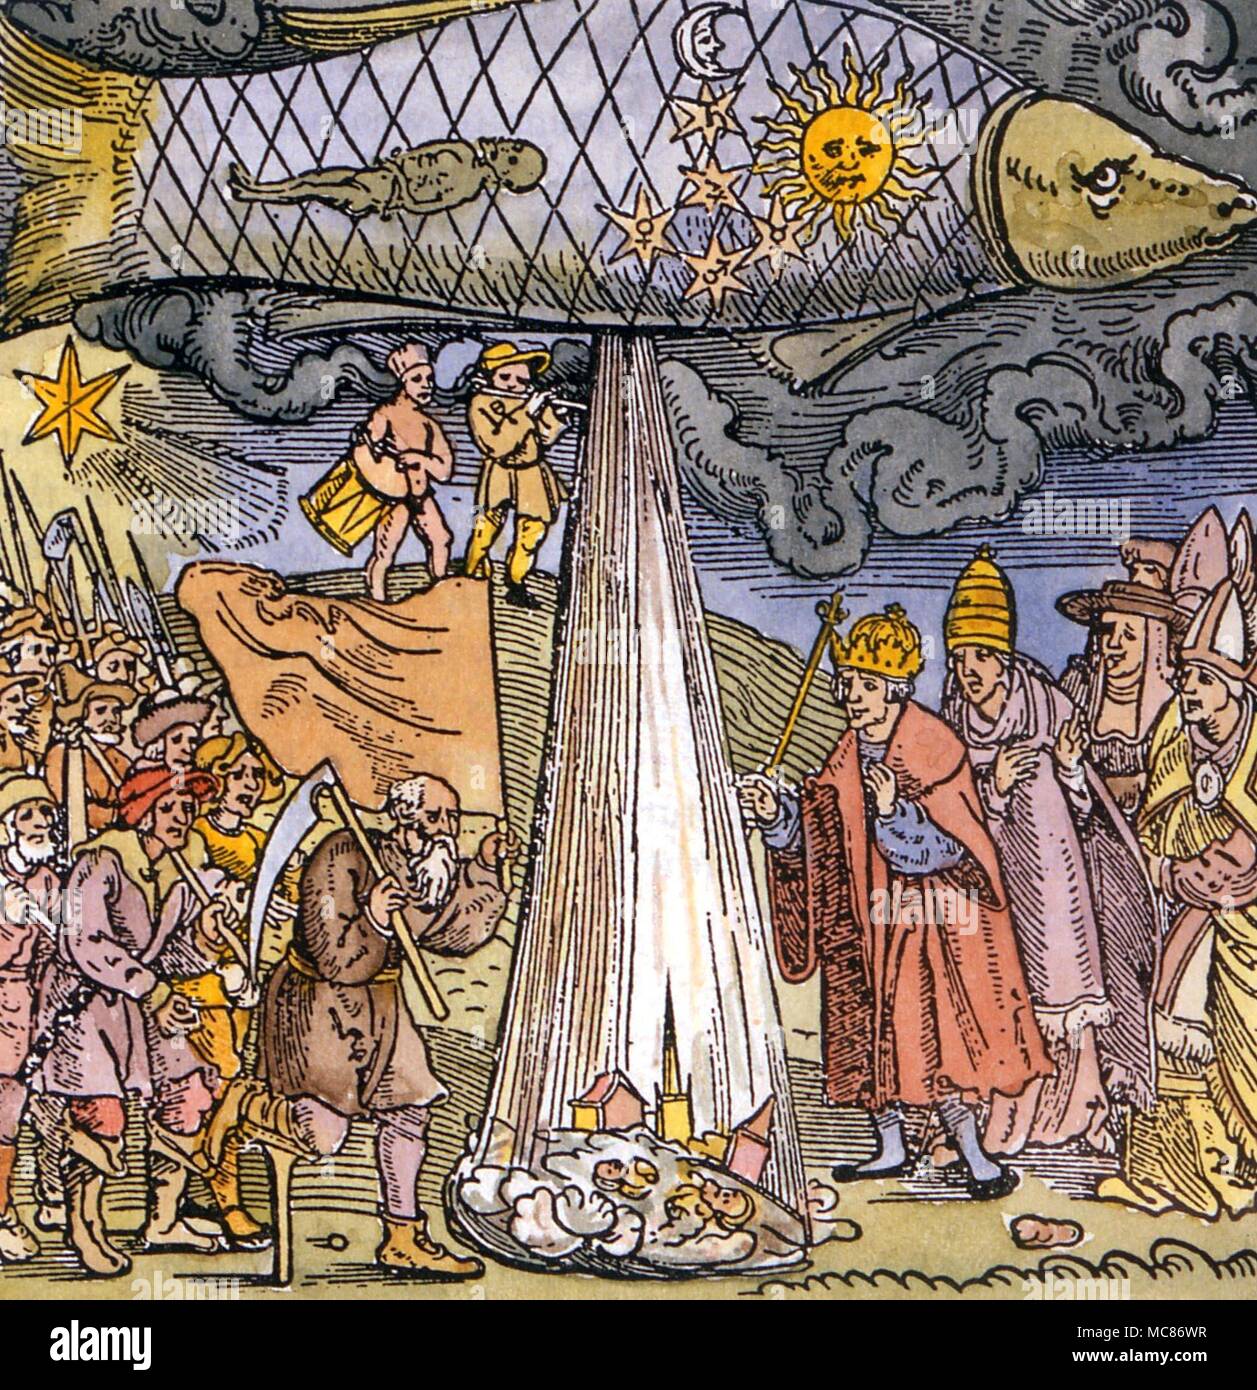 PREDICTIONS AND PROPHECY Woodcut illustrating the deluge which was supposed to destroy whole cities, due to the satellitium in Pisces. From Reymann's Practika, 1524 Stock Photo